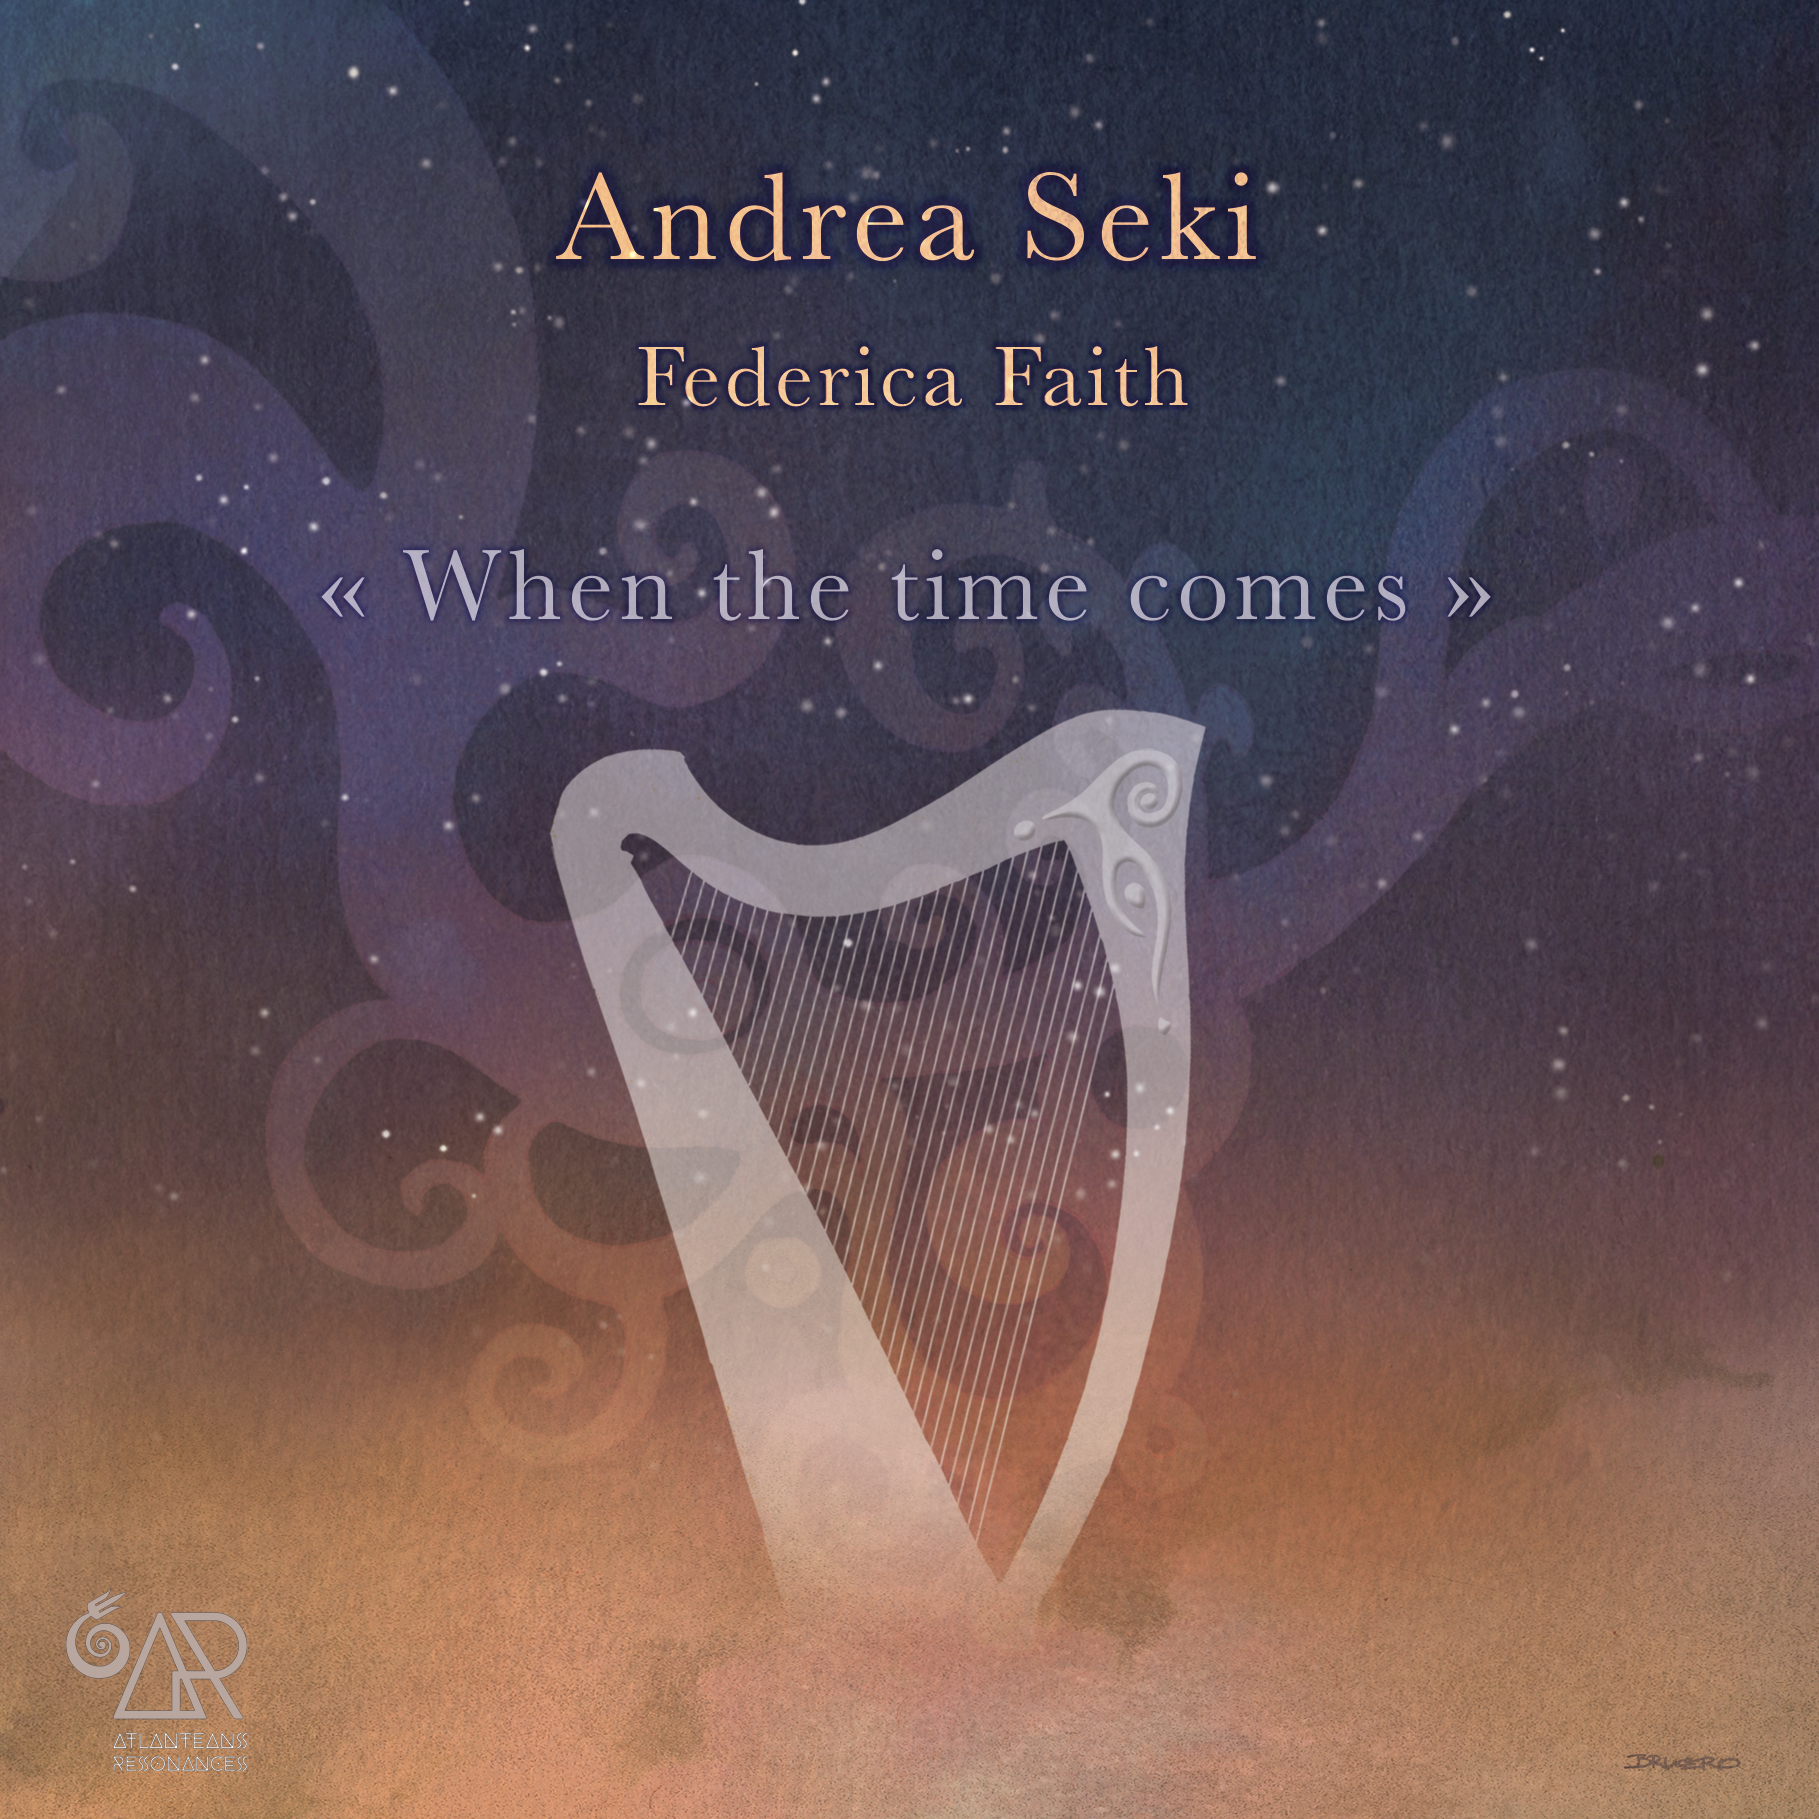 "When the time comes" the new bardic journey by Andrea Seki will be Spotify and all the Digital Music Streaming Services around the world since December 21, 2021.